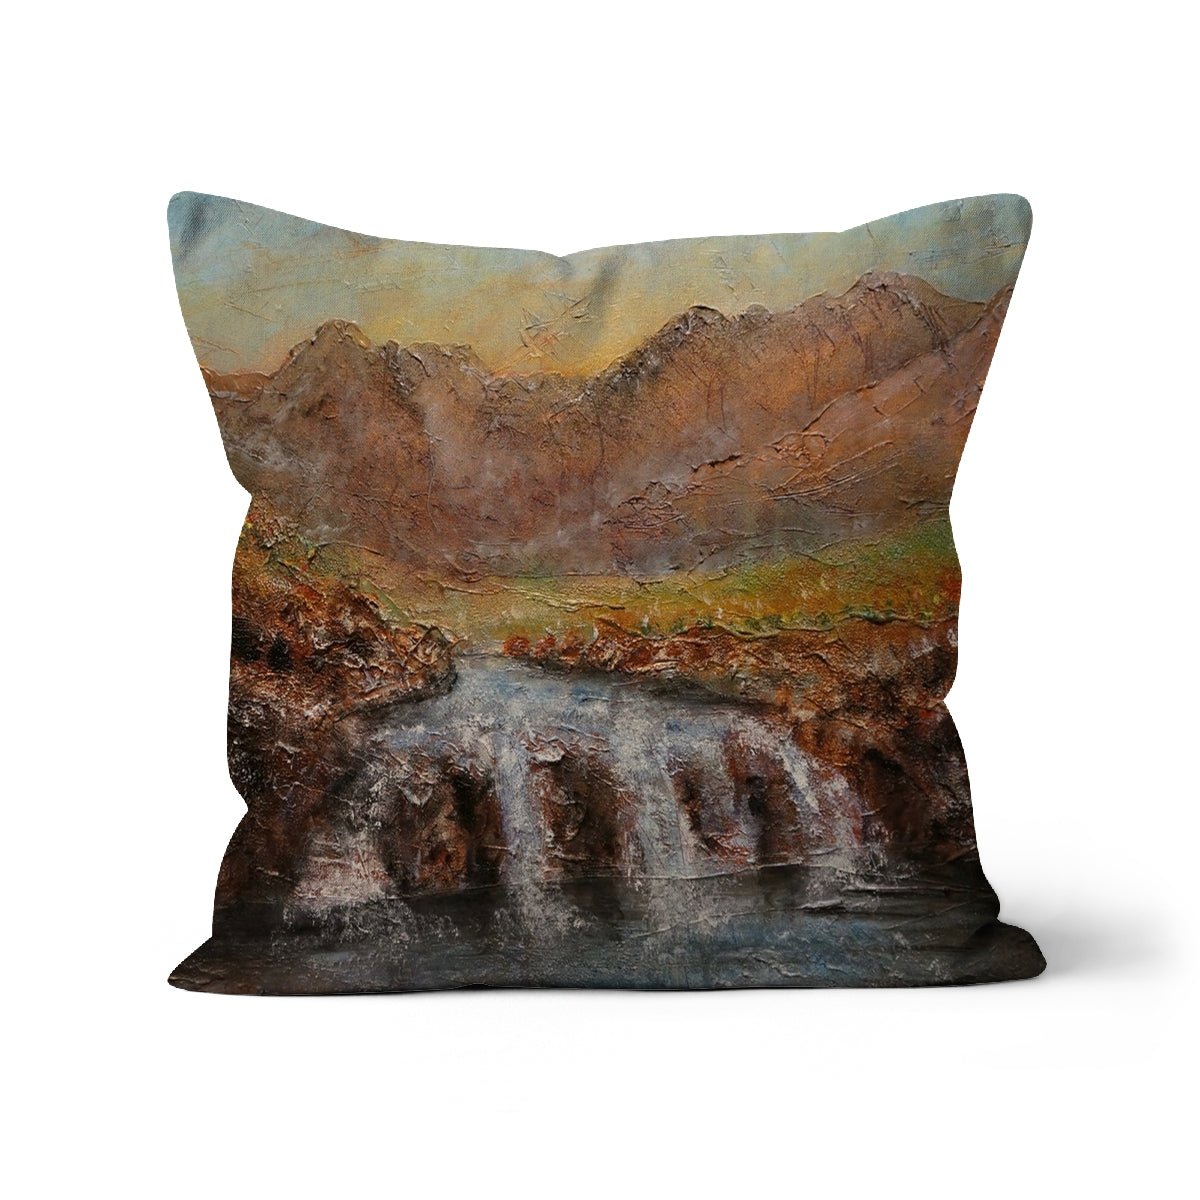 Fairy Pools Dawn Skye Art Gifts Cushion-Cushions-Skye Art Gallery-Faux Suede-22"x22"-Paintings, Prints, Homeware, Art Gifts From Scotland By Scottish Artist Kevin Hunter